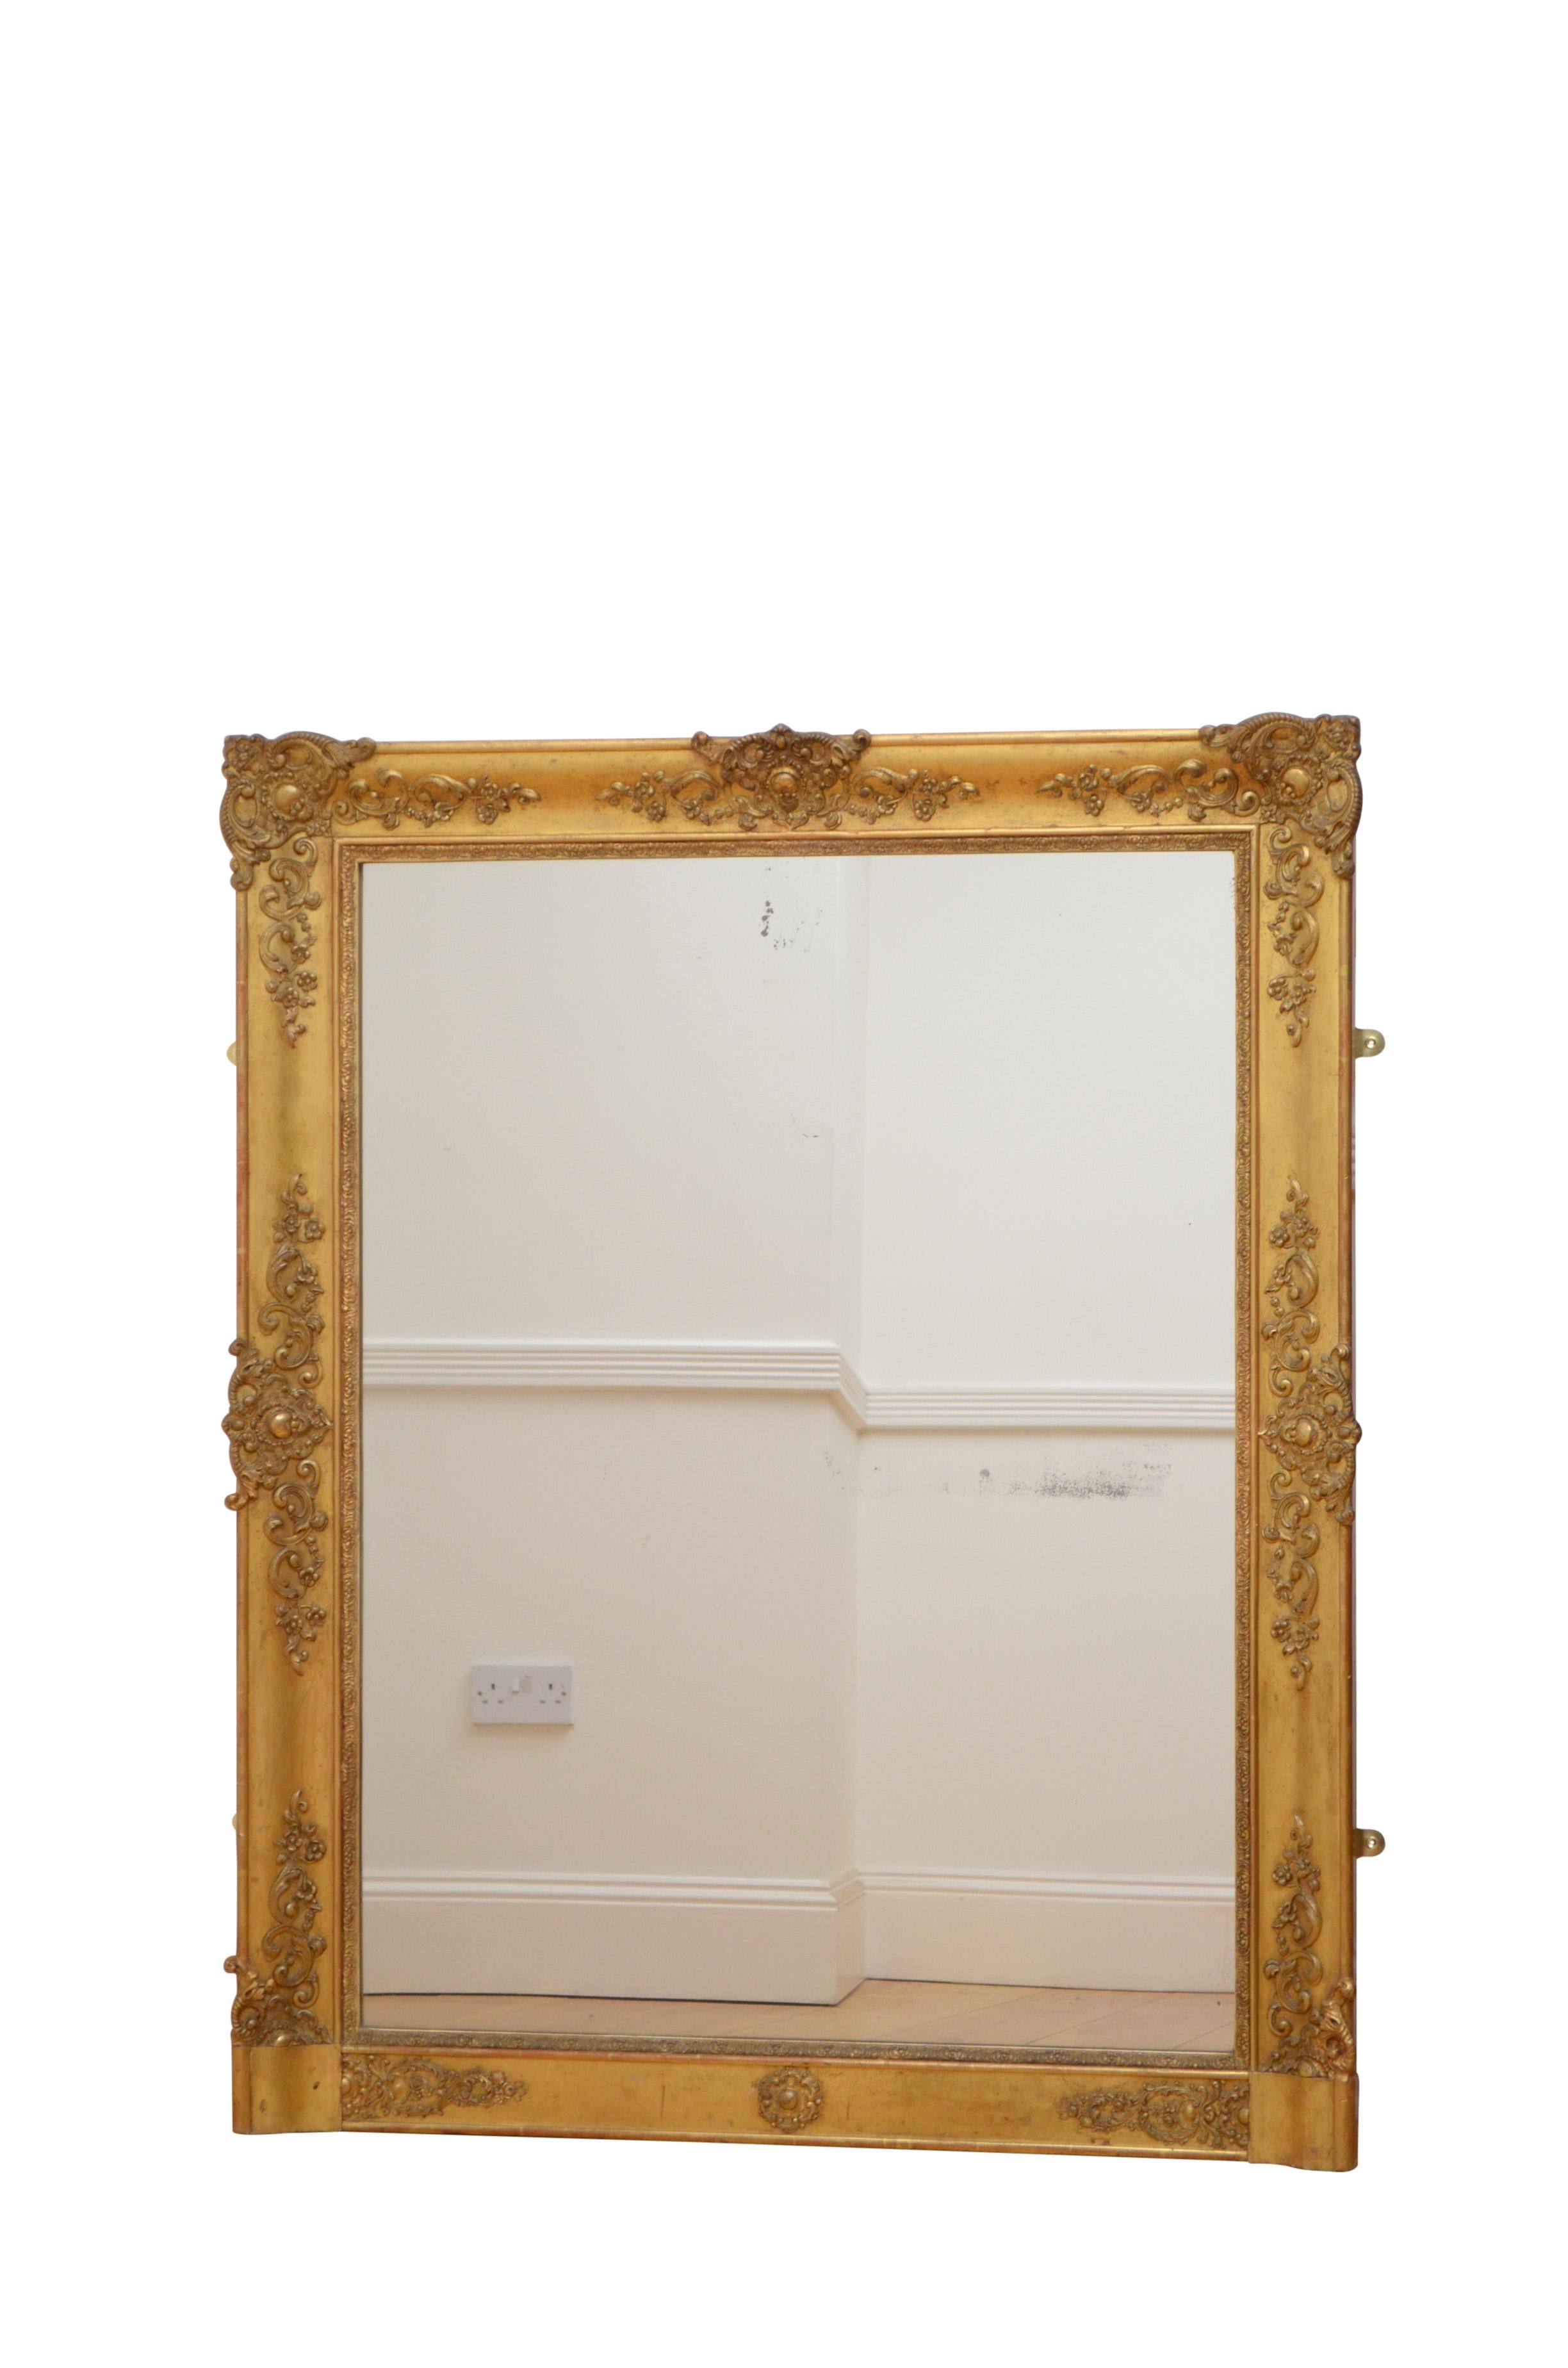 K0460 excellent French overmantel mirror / wall mirror with original foxed glass in cushion moulded and scroll decorated giltwood frame. This antique mirror retains its original glass, gilt and backboards, all in excellent home ready condition,